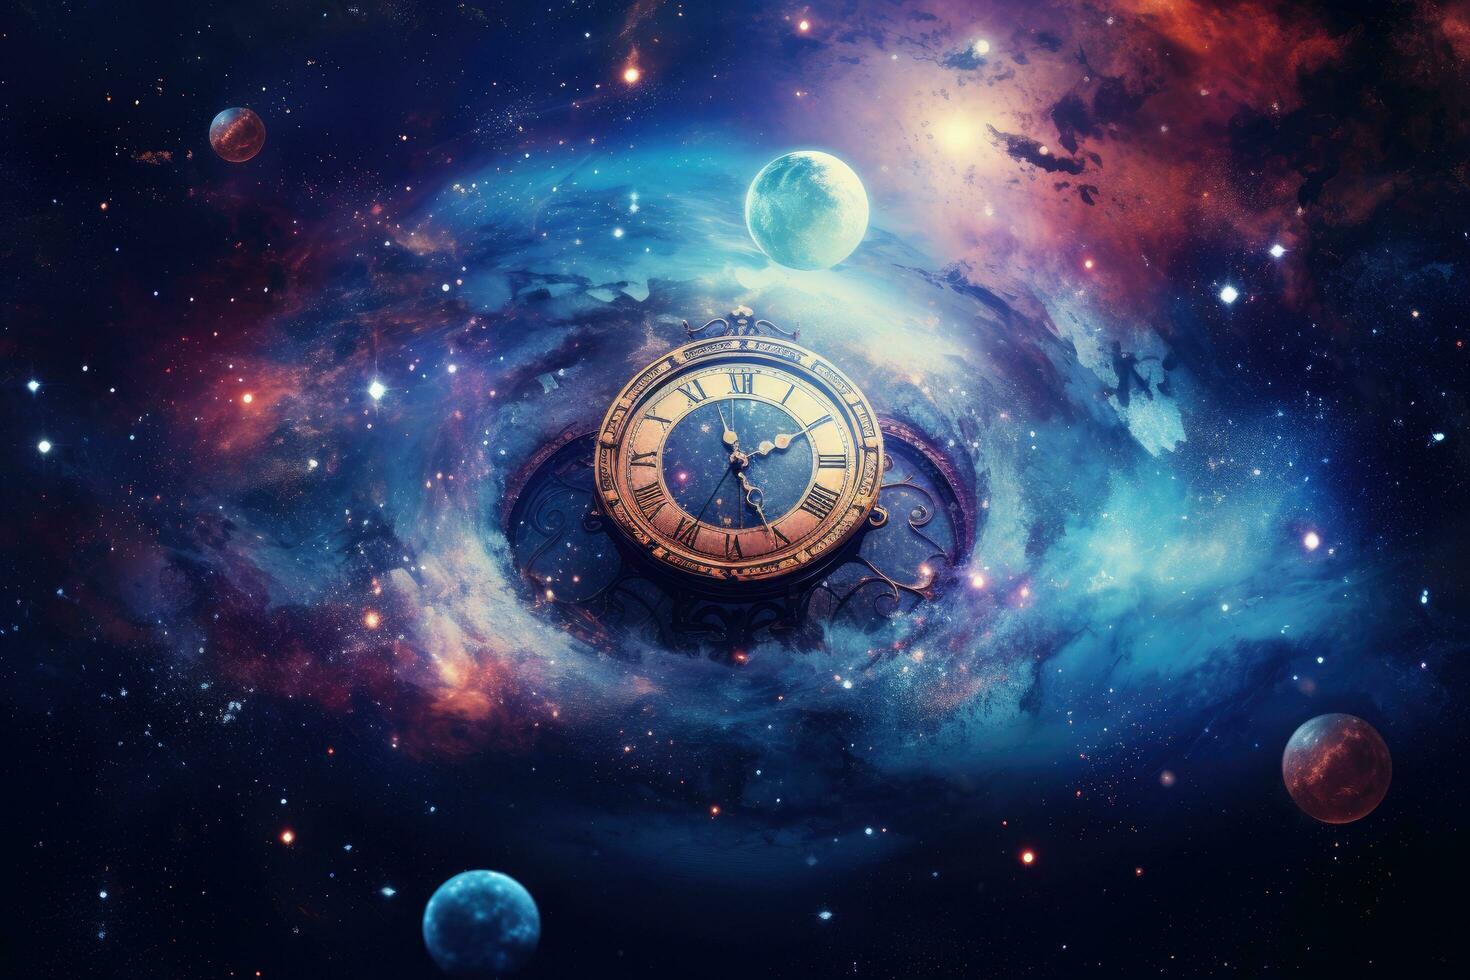 Vintage pocket watch in deep space. Elements of this image furnished by NASA, Colorful abstract wallpaper texture background, Universe and time travel between stars and planets, AI Generated photo